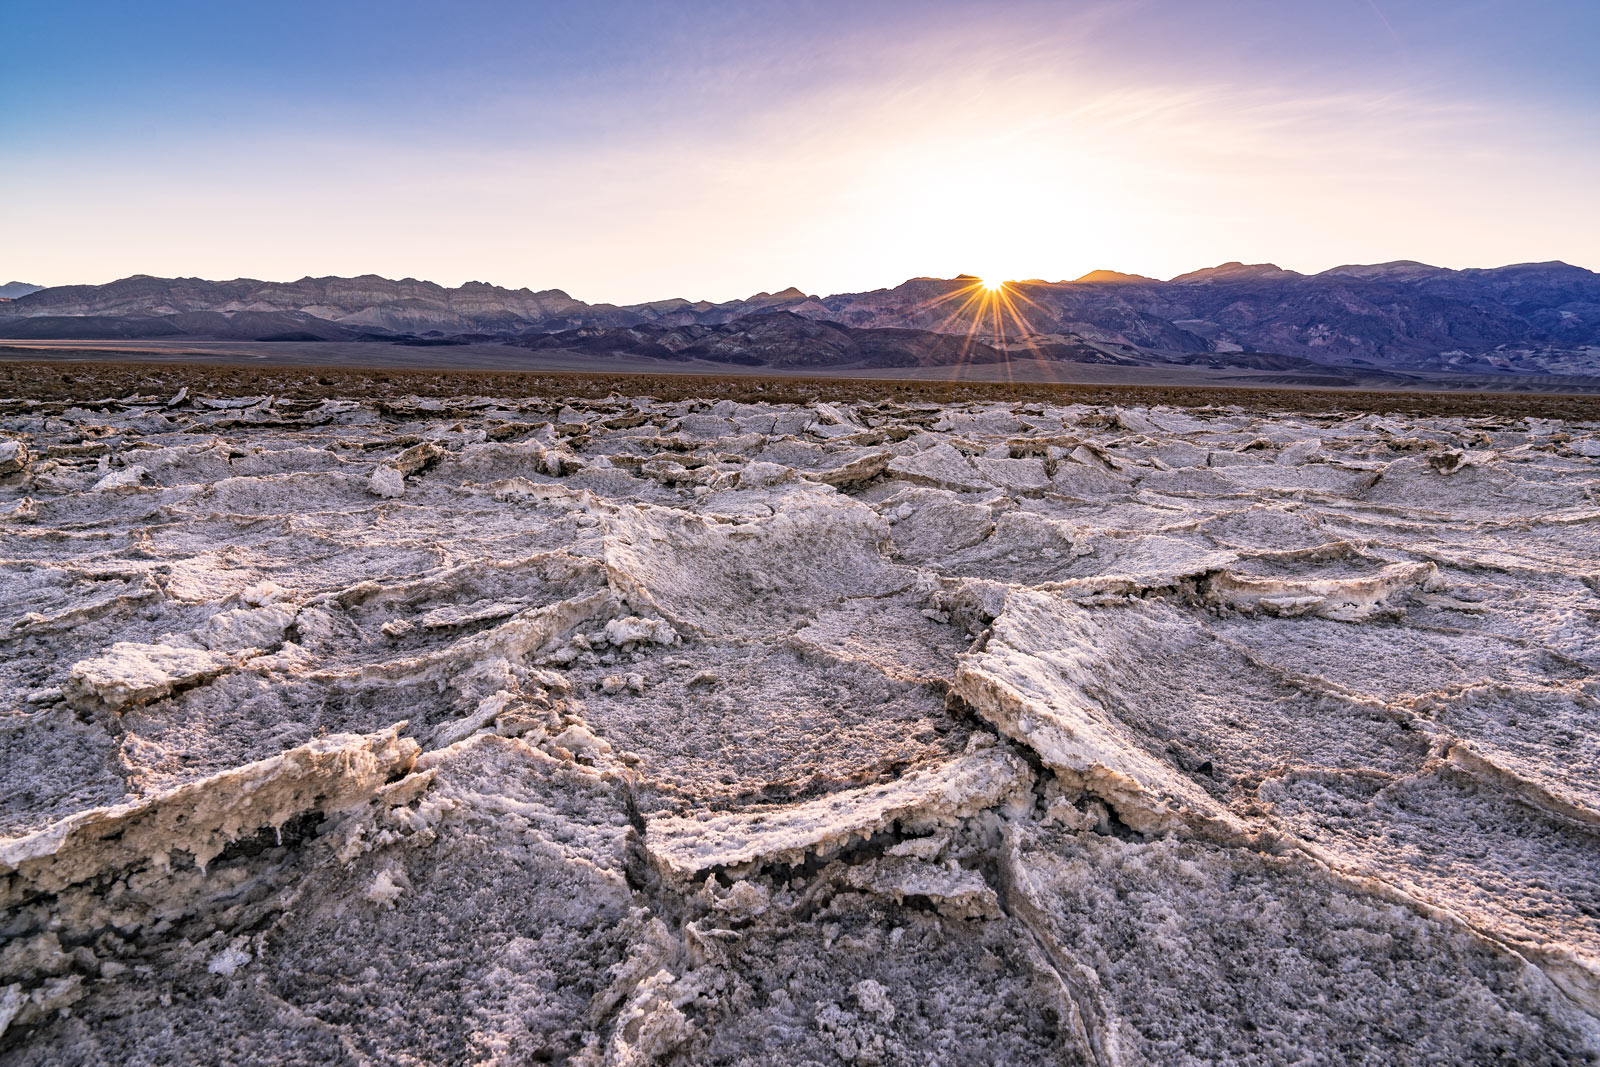 DEVILS GOLF COURSE: How to Visit This Iconic Death Valley Location